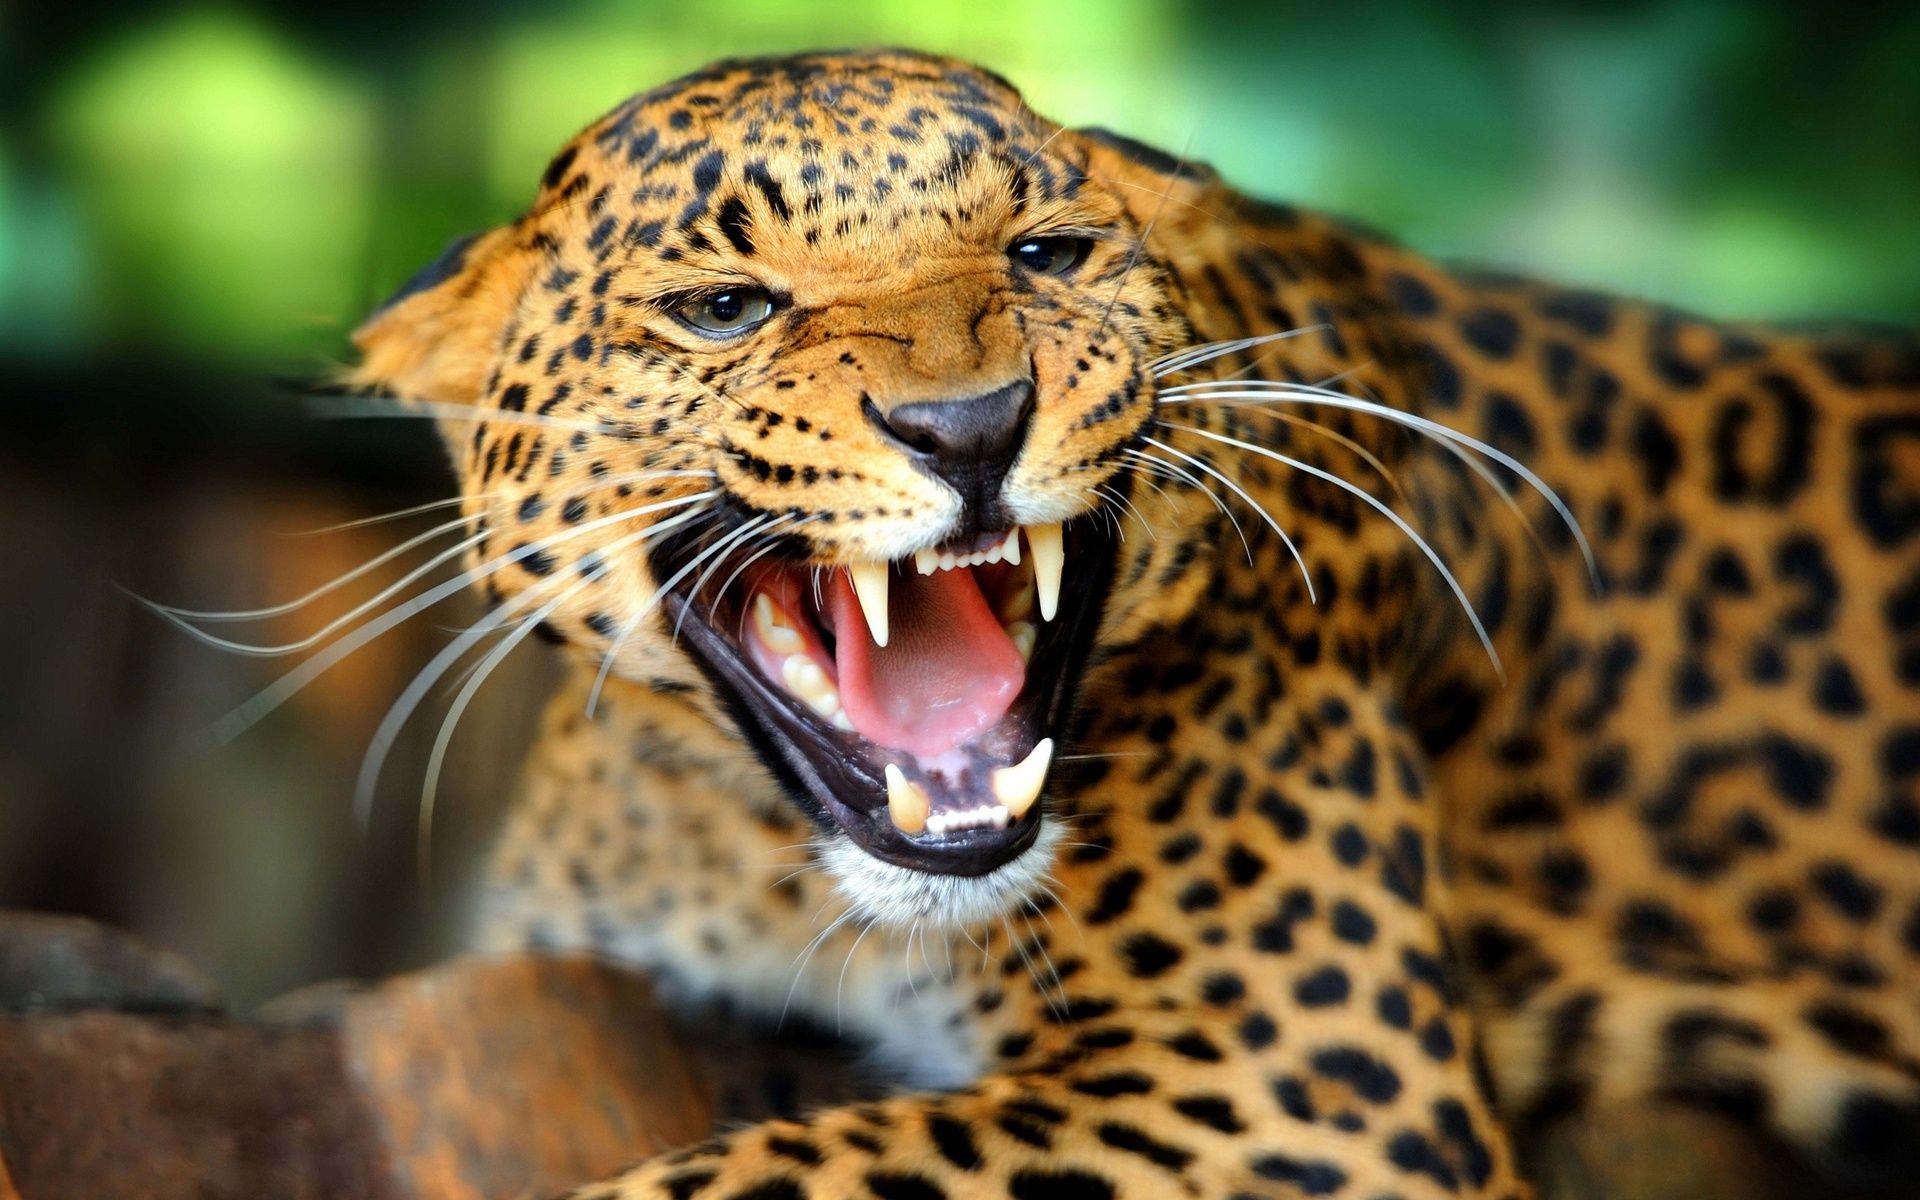 Cheetah Facial Features, Sharp Teeth 640x1136 IPhone 5 5S 5C SE Wallpaper, Background, Picture, Image